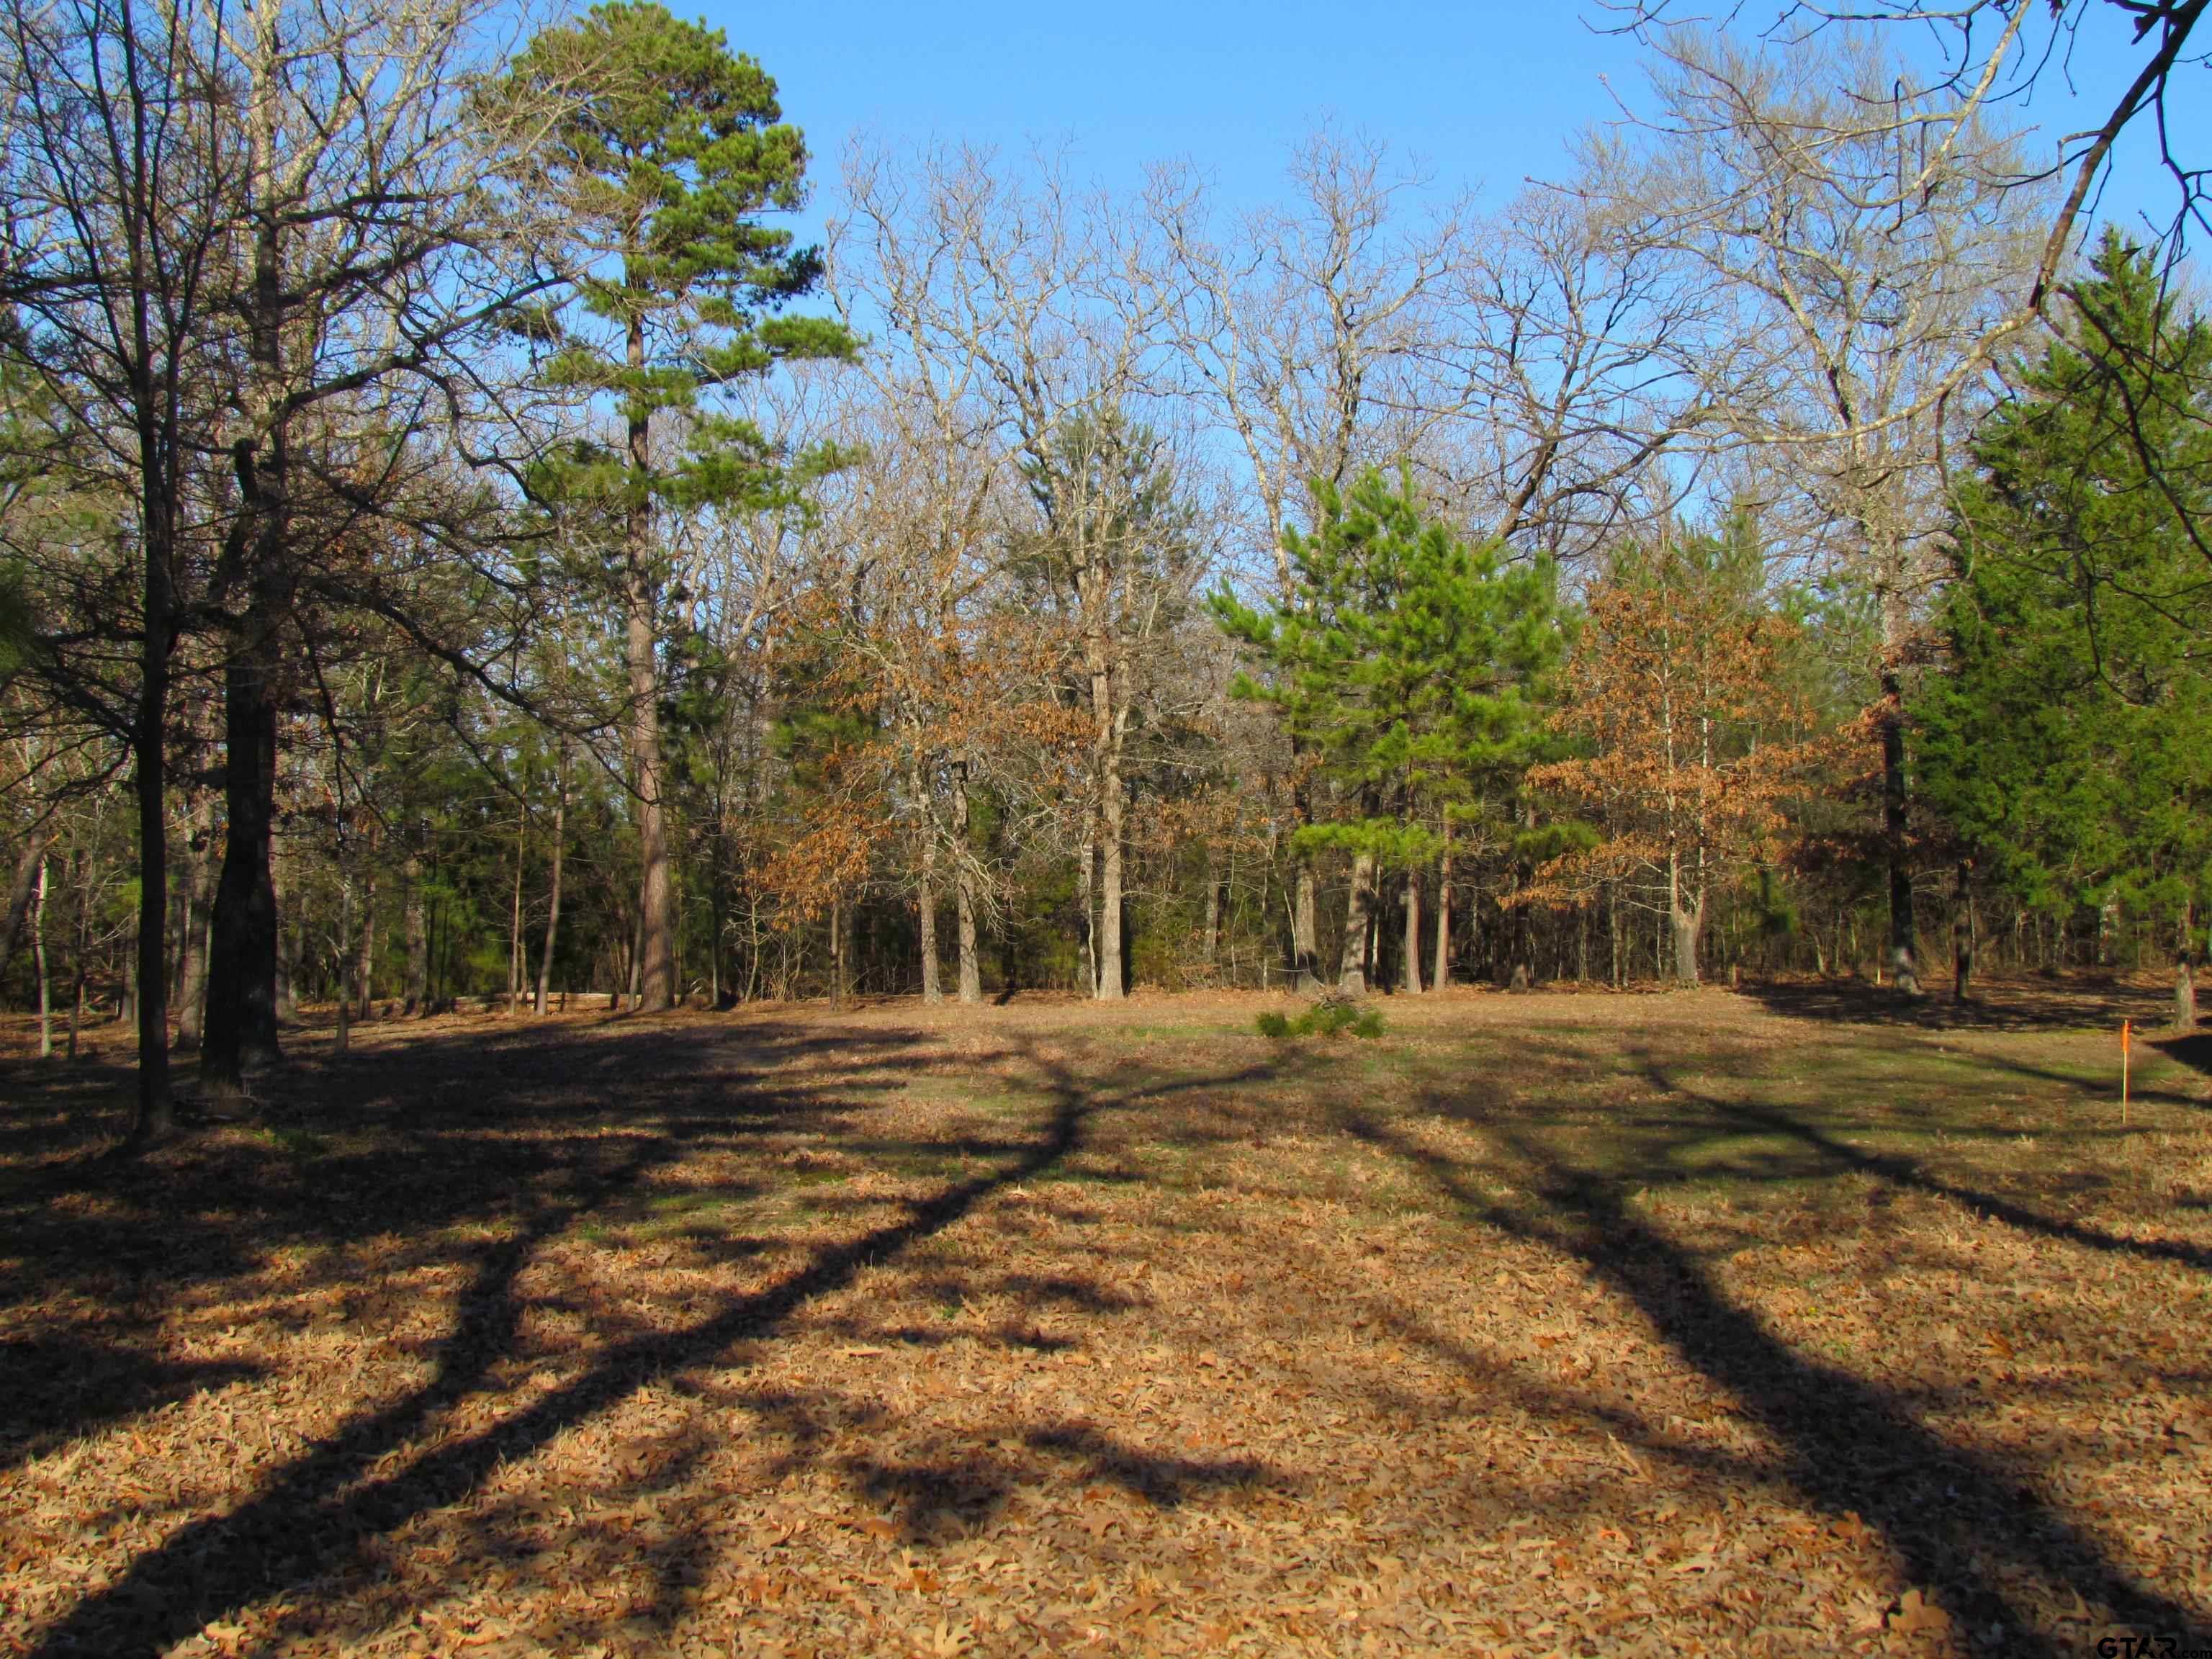 a view of dirt yard with large trees